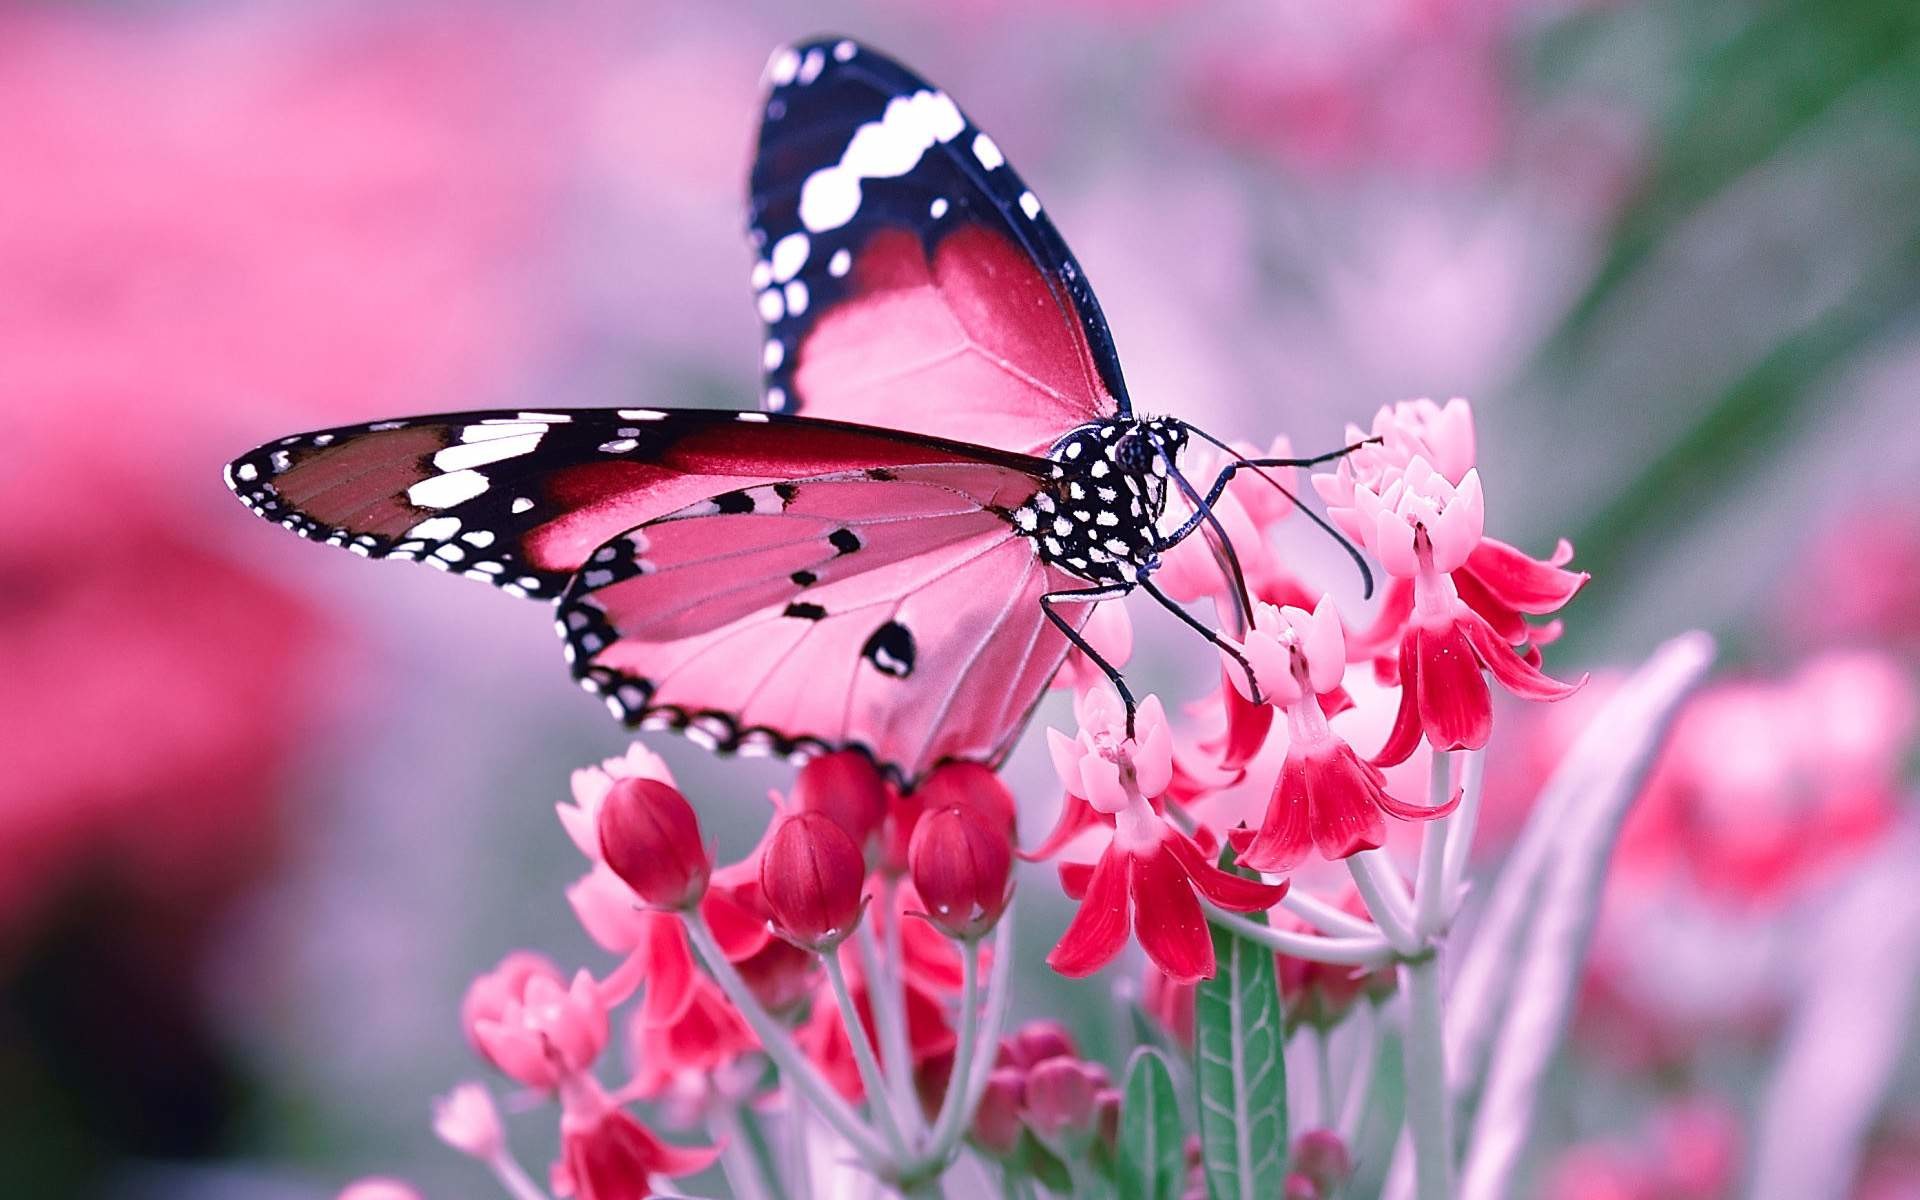 Butterfly Wallpaper High Quality For Desktop Wallpaper 1920 x 1200 px 692.31 KB purple animated pink